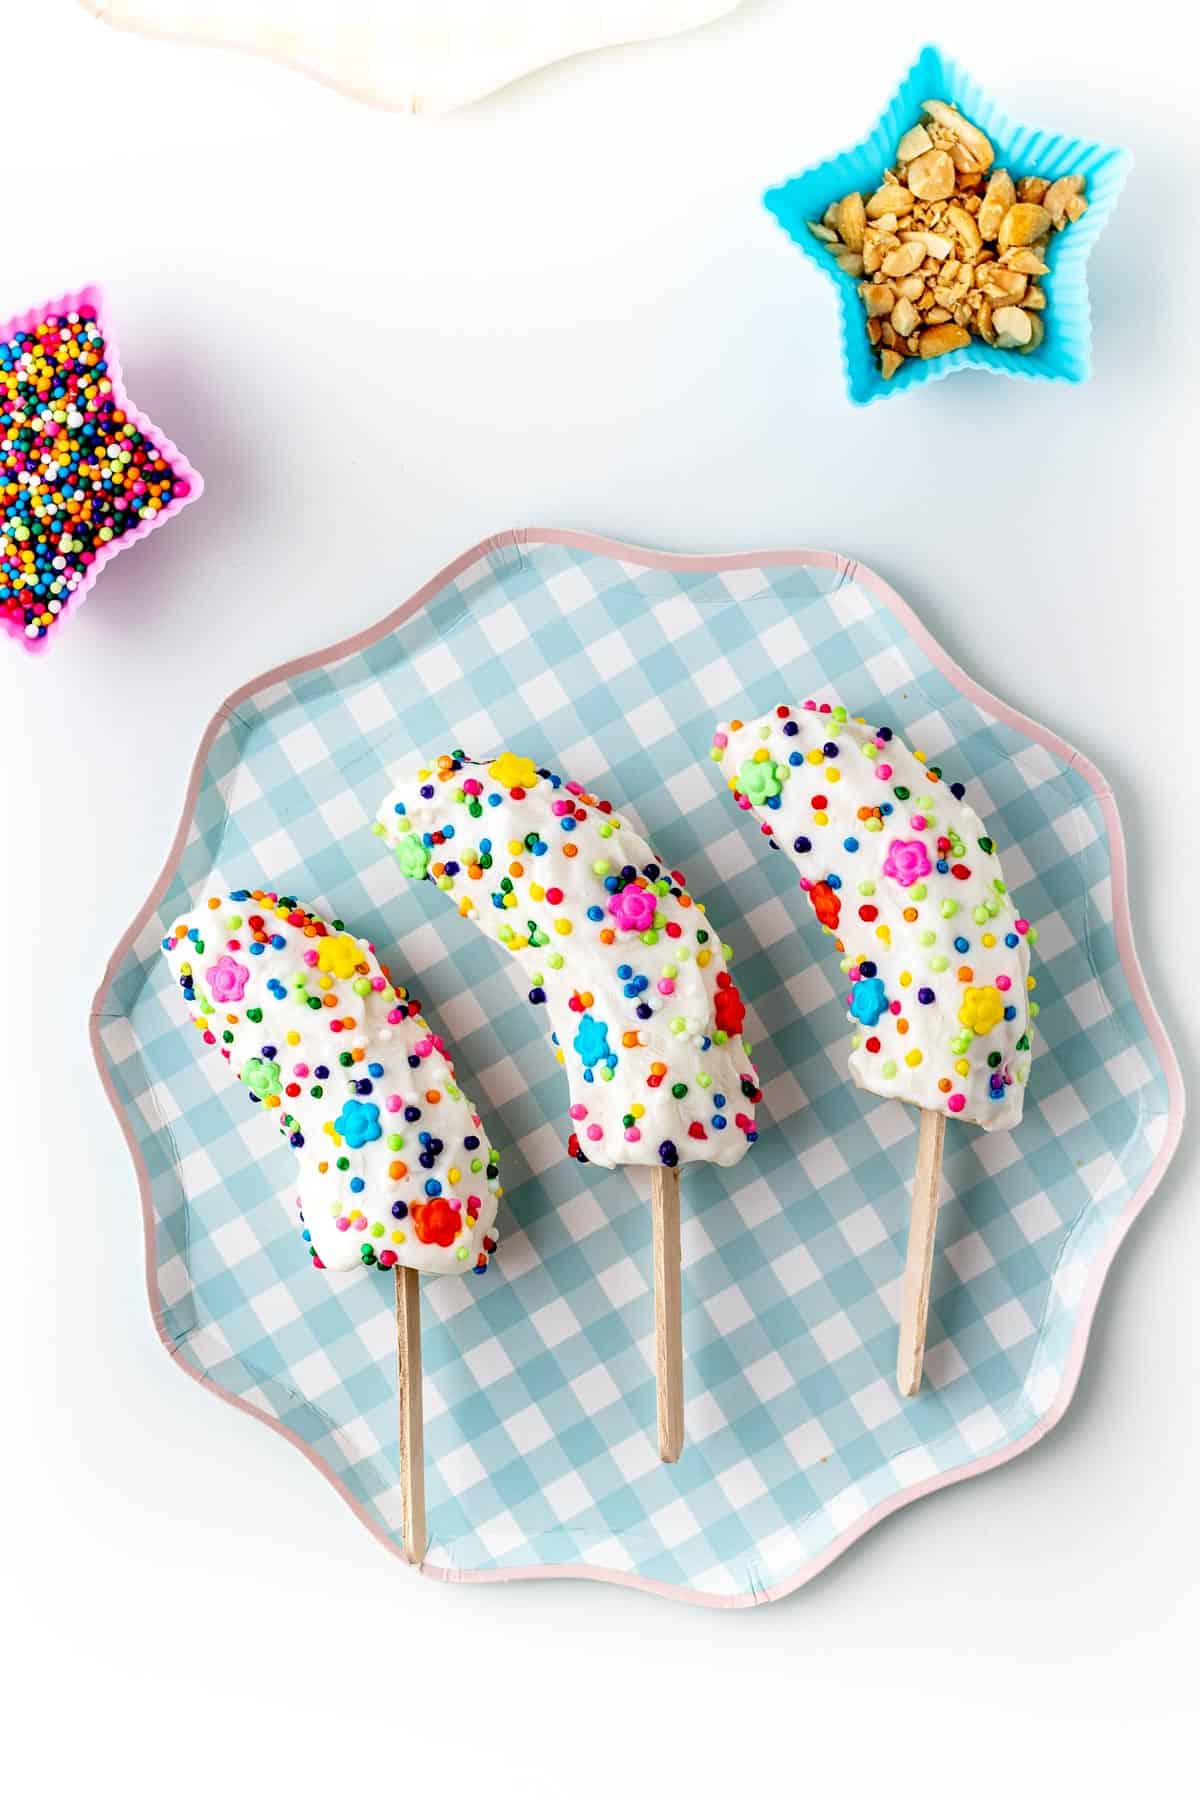 Frozen banana pops covered in Greek yogurt and sprinkles on a blue and white plaid plate.